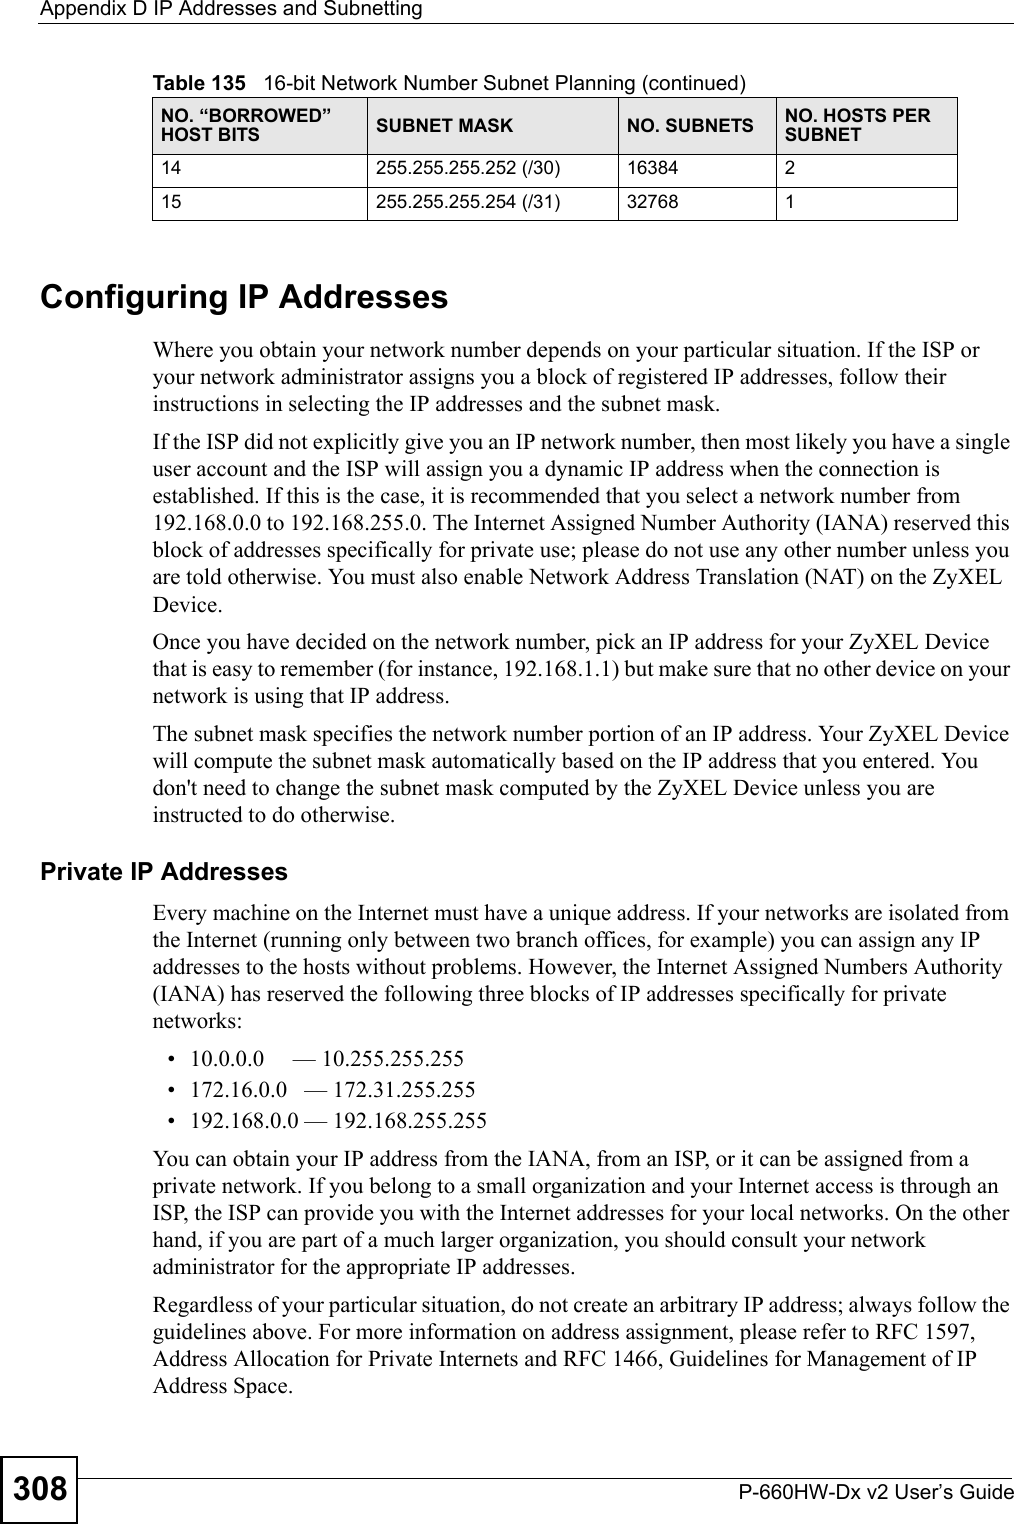 Appendix D IP Addresses and SubnettingP-660HW-Dx v2 User’s Guide308Configuring IP AddressesWhere you obtain your network number depends on your particular situation. If the ISP or your network administrator assigns you a block of registered IP addresses, follow their instructions in selecting the IP addresses and the subnet mask.If the ISP did not explicitly give you an IP network number, then most likely you have a single user account and the ISP will assign you a dynamic IP address when the connection is established. If this is the case, it is recommended that you select a network number from 192.168.0.0 to 192.168.255.0. The Internet Assigned Number Authority (IANA) reserved this block of addresses specifically for private use; please do not use any other number unless you are told otherwise. You must also enable Network Address Translation (NAT) on the ZyXEL Device.  Once you have decided on the network number, pick an IP address for your ZyXEL Device that is easy to remember (for instance, 192.168.1.1) but make sure that no other device on your network is using that IP address.The subnet mask specifies the network number portion of an IP address. Your ZyXEL Device will compute the subnet mask automatically based on the IP address that you entered. You don&apos;t need to change the subnet mask computed by the ZyXEL Device unless you are instructed to do otherwise.Private IP AddressesEvery machine on the Internet must have a unique address. If your networks are isolated from the Internet (running only between two branch offices, for example) you can assign any IP addresses to the hosts without problems. However, the Internet Assigned Numbers Authority (IANA) has reserved the following three blocks of IP addresses specifically for private networks:• 10.0.0.0     — 10.255.255.255• 172.16.0.0   — 172.31.255.255• 192.168.0.0 — 192.168.255.255You can obtain your IP address from the IANA, from an ISP, or it can be assigned from a private network. If you belong to a small organization and your Internet access is through an ISP, the ISP can provide you with the Internet addresses for your local networks. On the other hand, if you are part of a much larger organization, you should consult your network administrator for the appropriate IP addresses.Regardless of your particular situation, do not create an arbitrary IP address; always follow the guidelines above. For more information on address assignment, please refer to RFC 1597, Address Allocation for Private Internets and RFC 1466, Guidelines for Management of IP Address Space.14 255.255.255.252 (/30) 16384 215 255.255.255.254 (/31) 32768 1Table 135   16-bit Network Number Subnet Planning (continued)NO. “BORROWED” HOST BITS SUBNET MASK NO. SUBNETS NO. HOSTS PER SUBNET